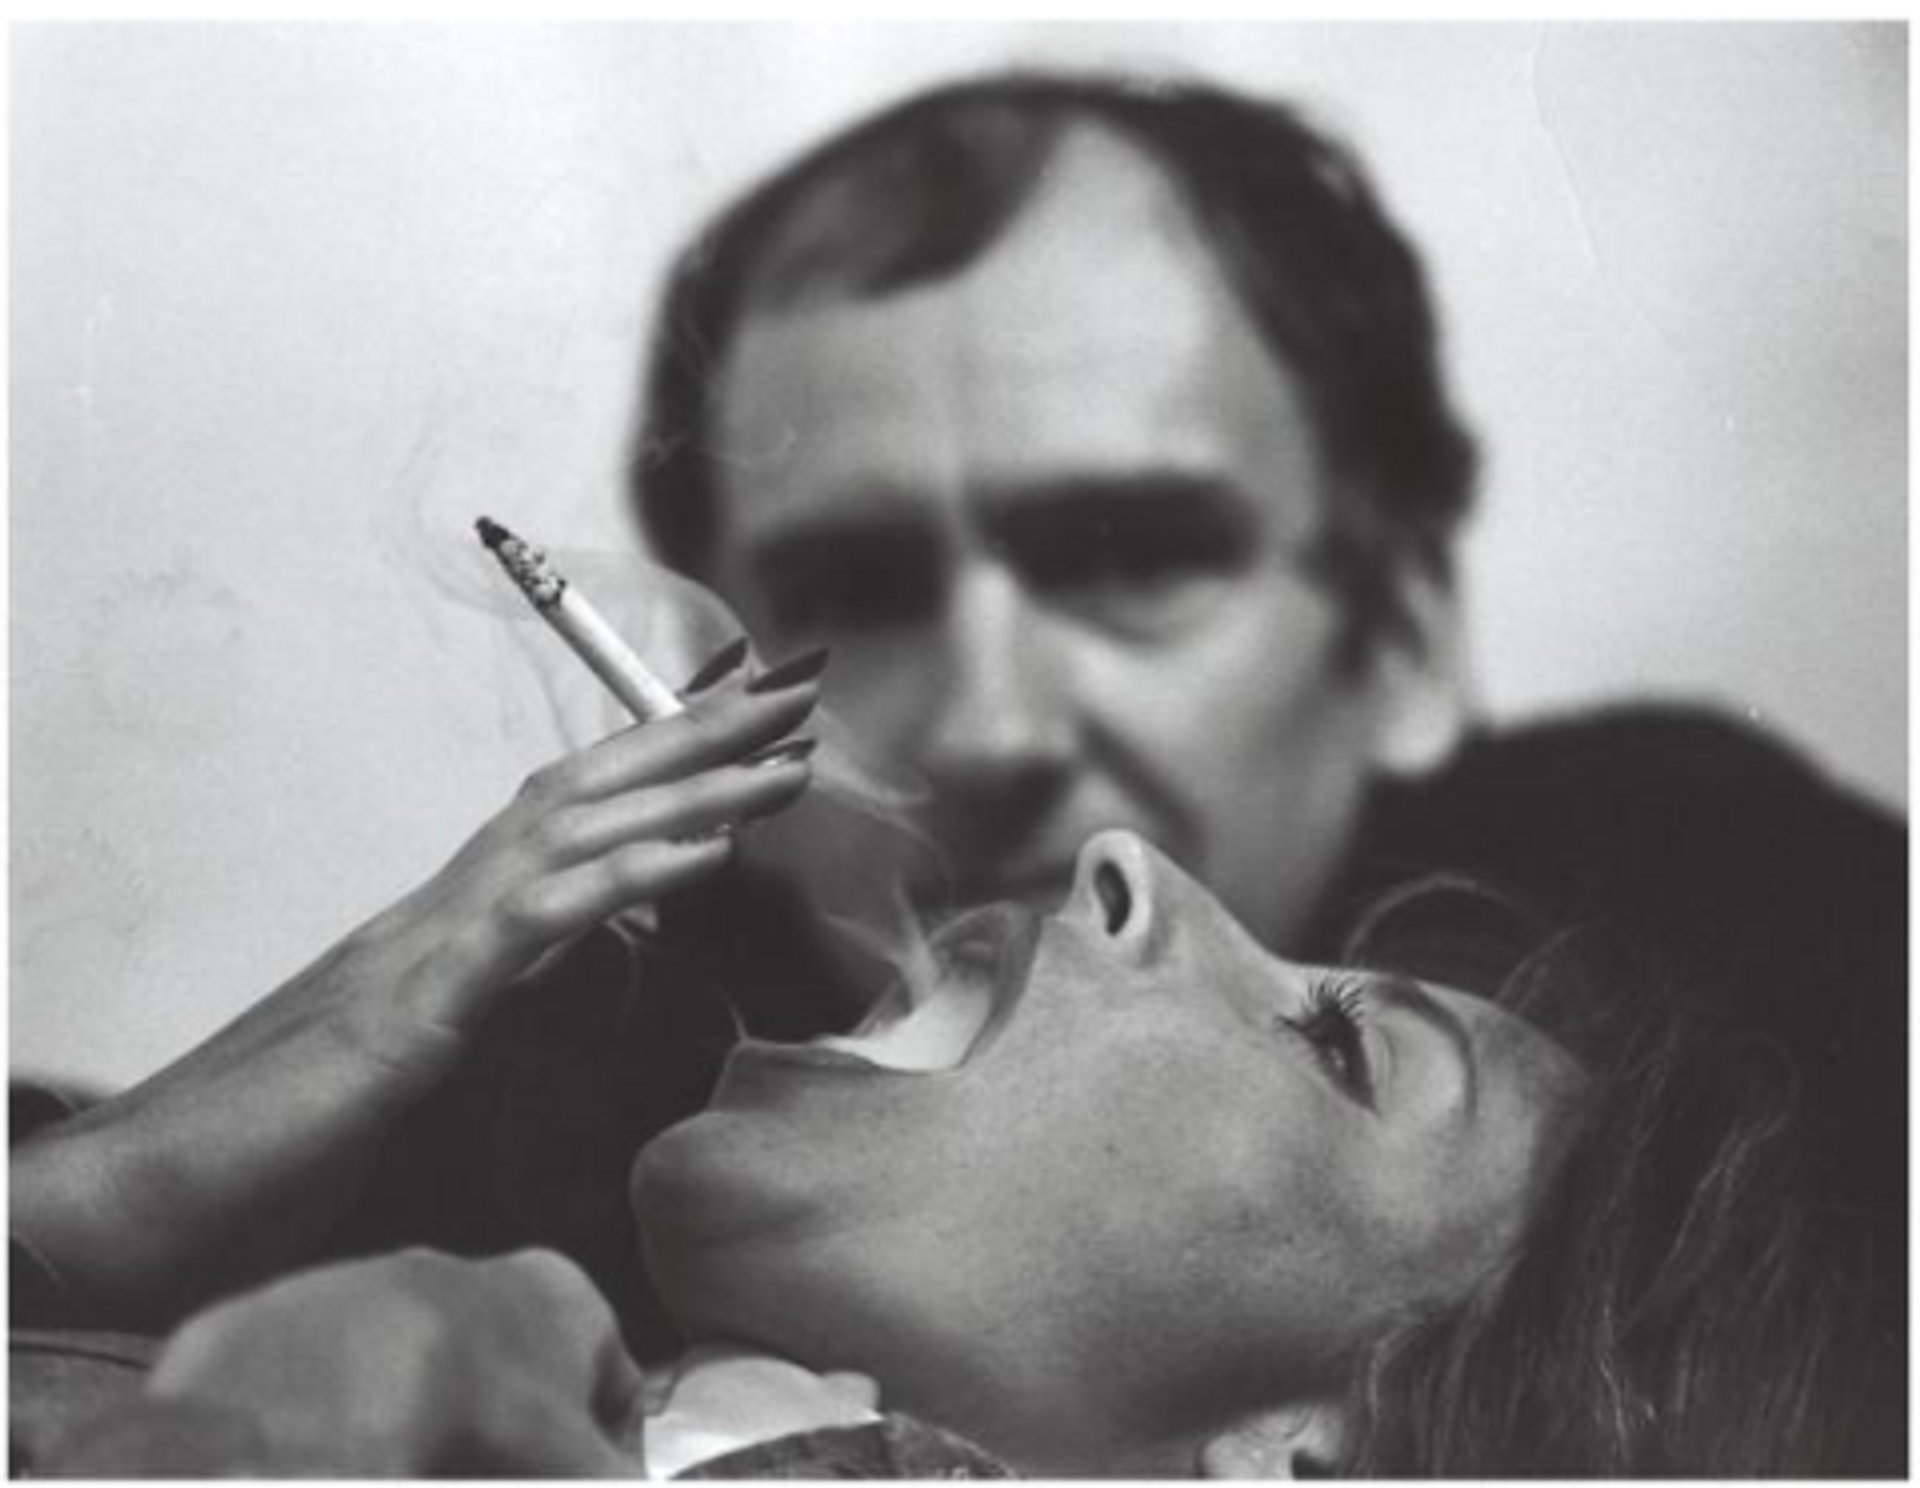 Photograph of Tom Wesselmann holding a cigarette above a reclining woman's mouth, capturing the moment of smoke exhalation.